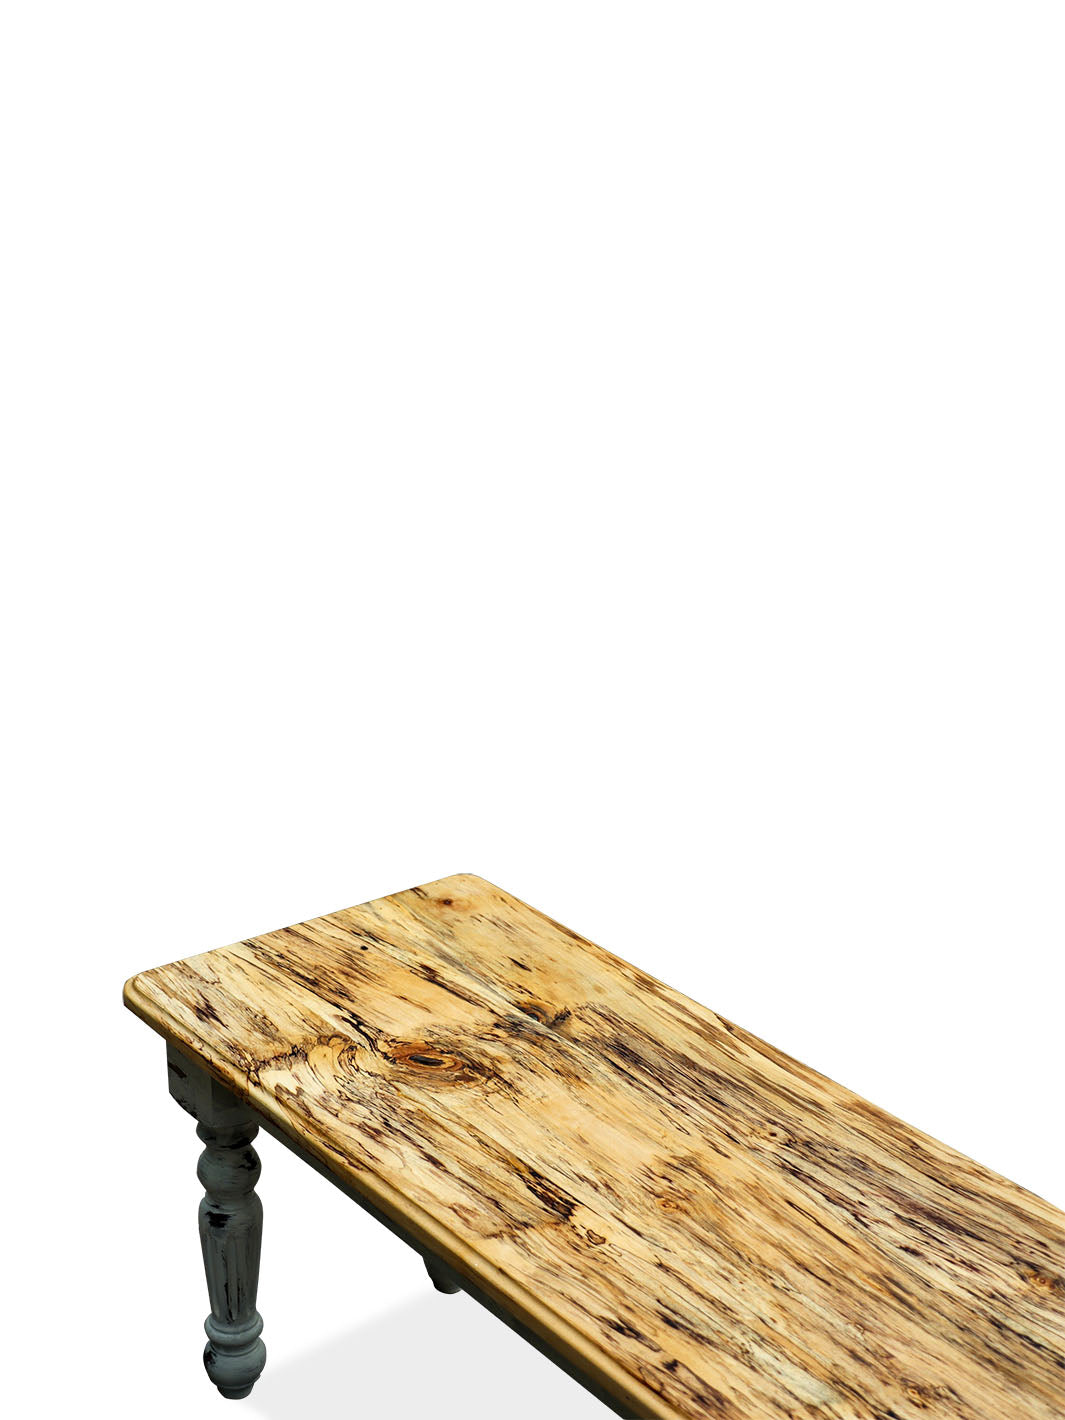 Spalted Maple Farmhouse Bench with White-Distressed Paint